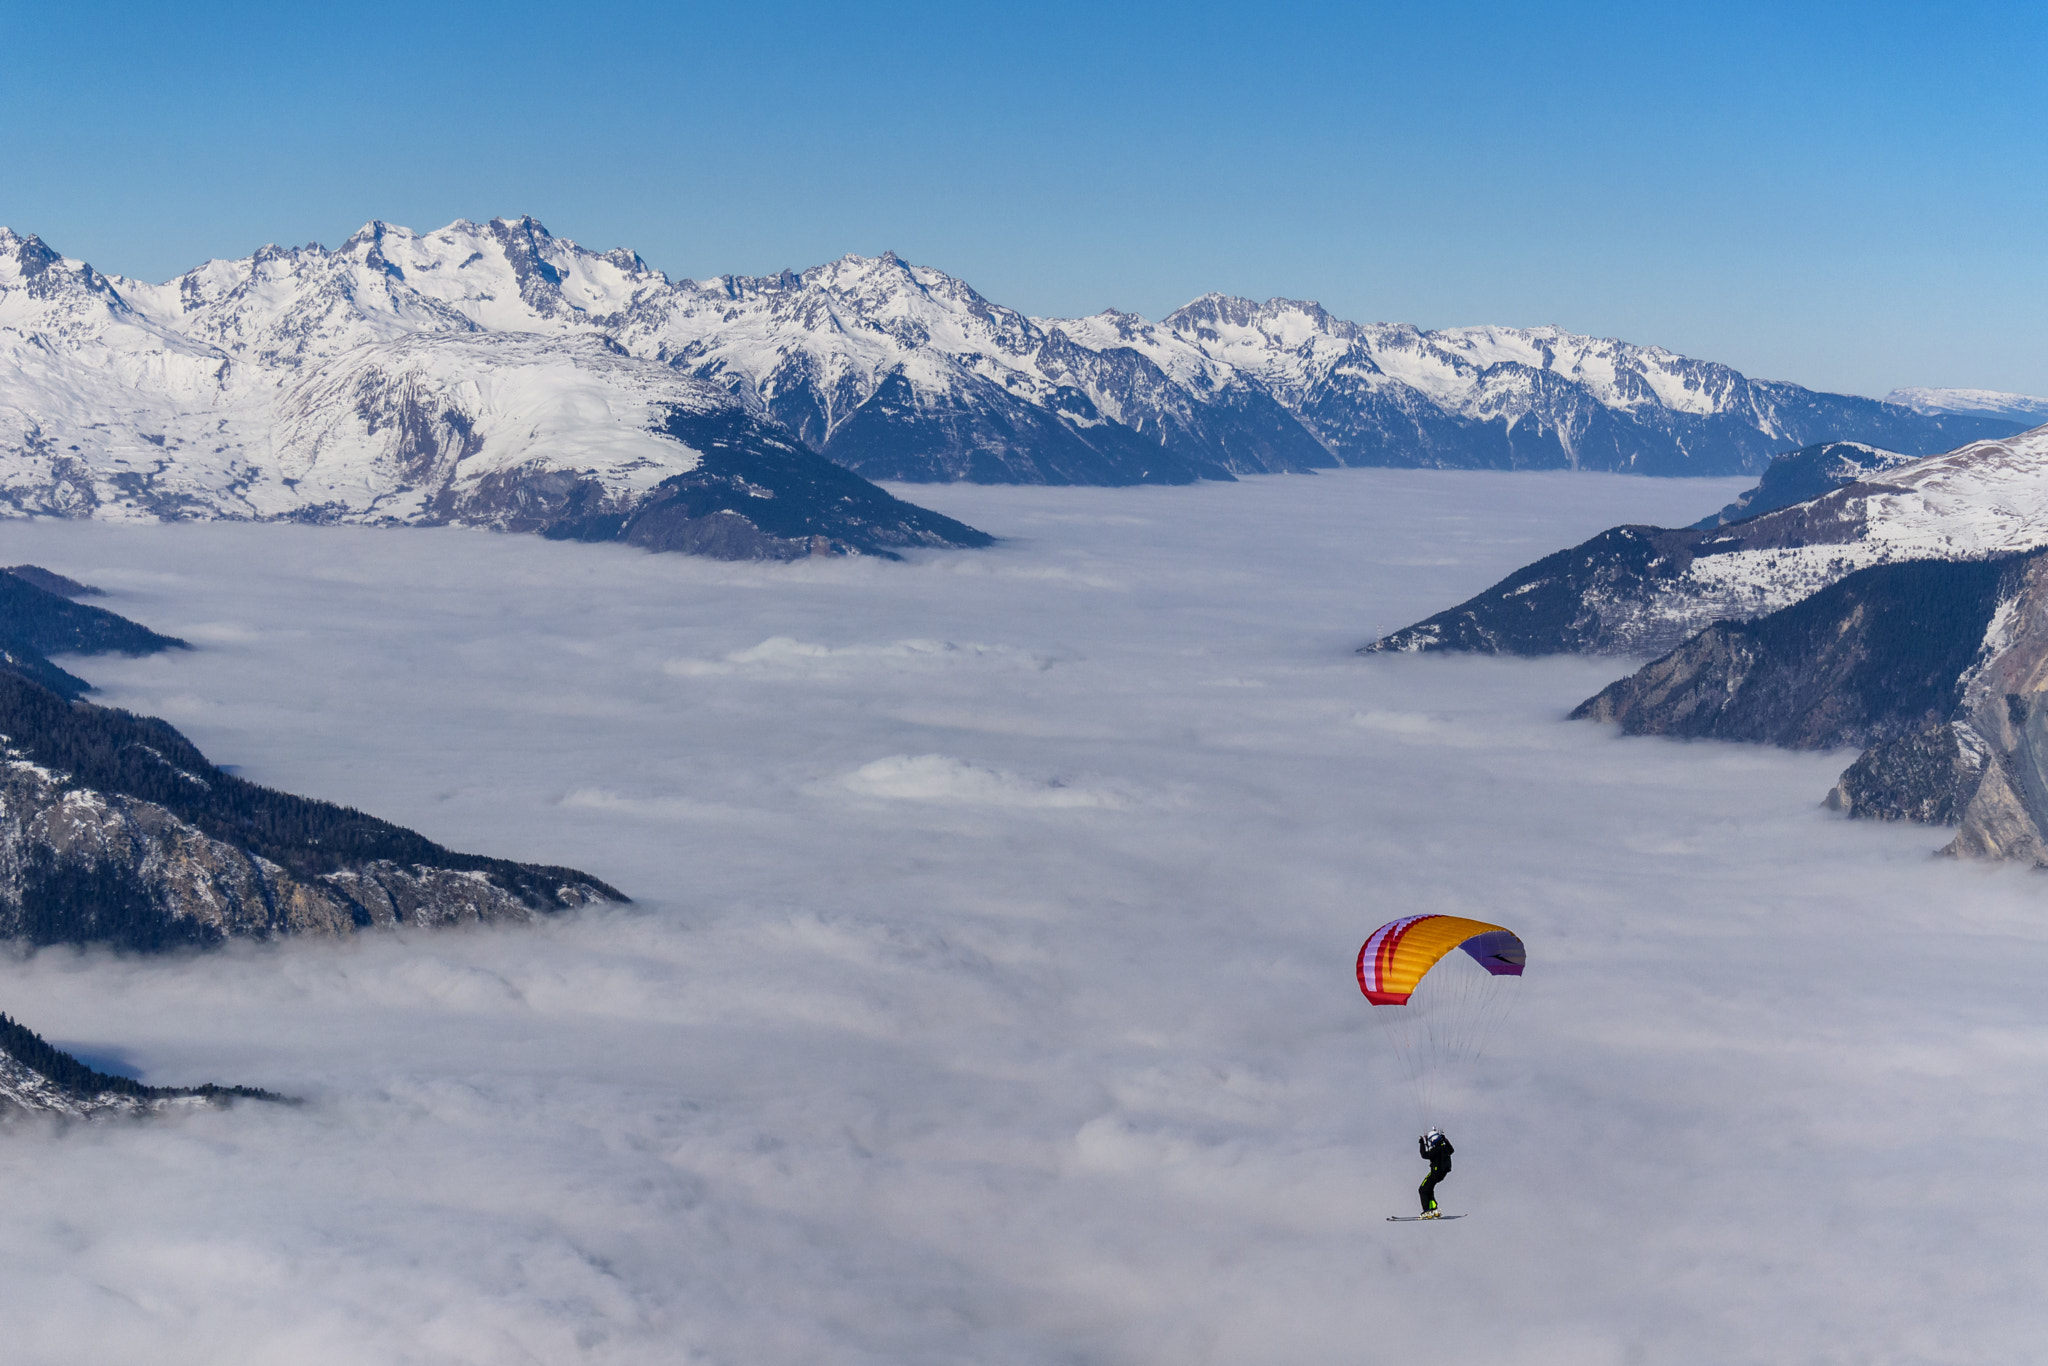 Nikon 1 J5 sample photo. Paragliding skiing and sea of clouds in the alps photography